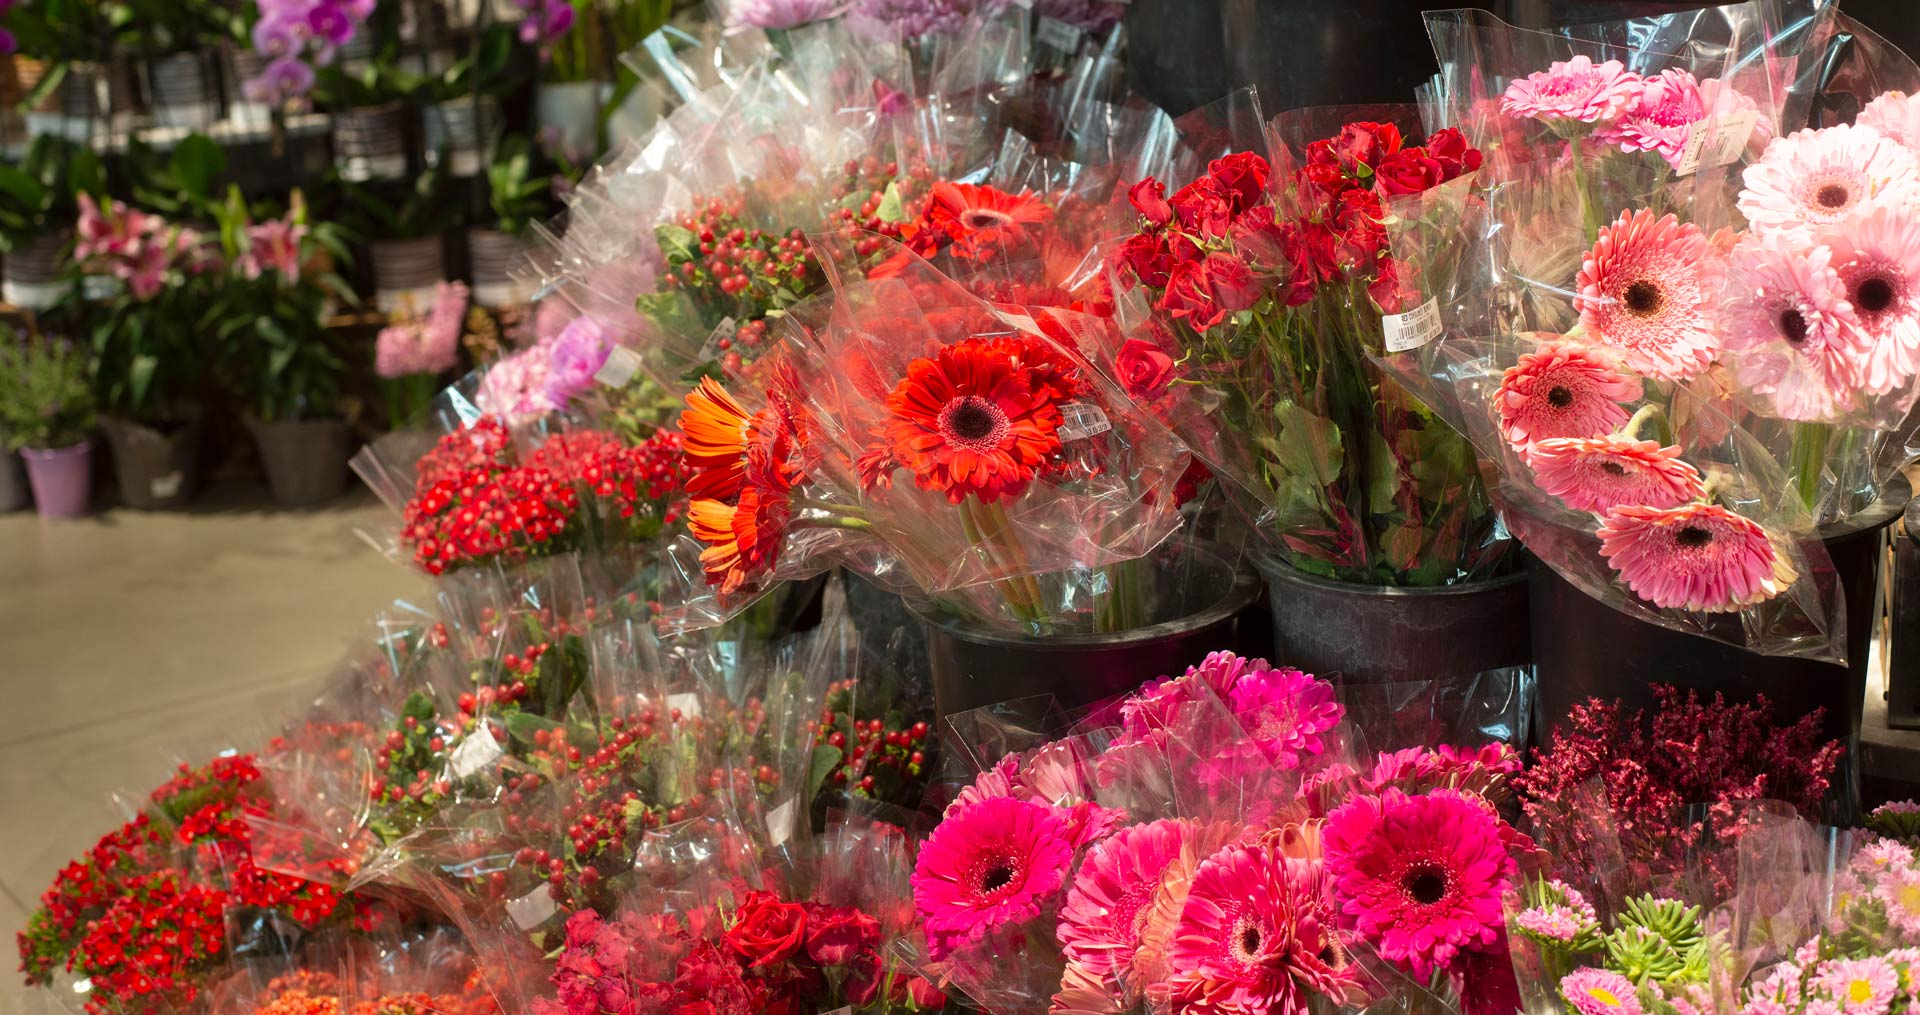 Image of flowers at a market